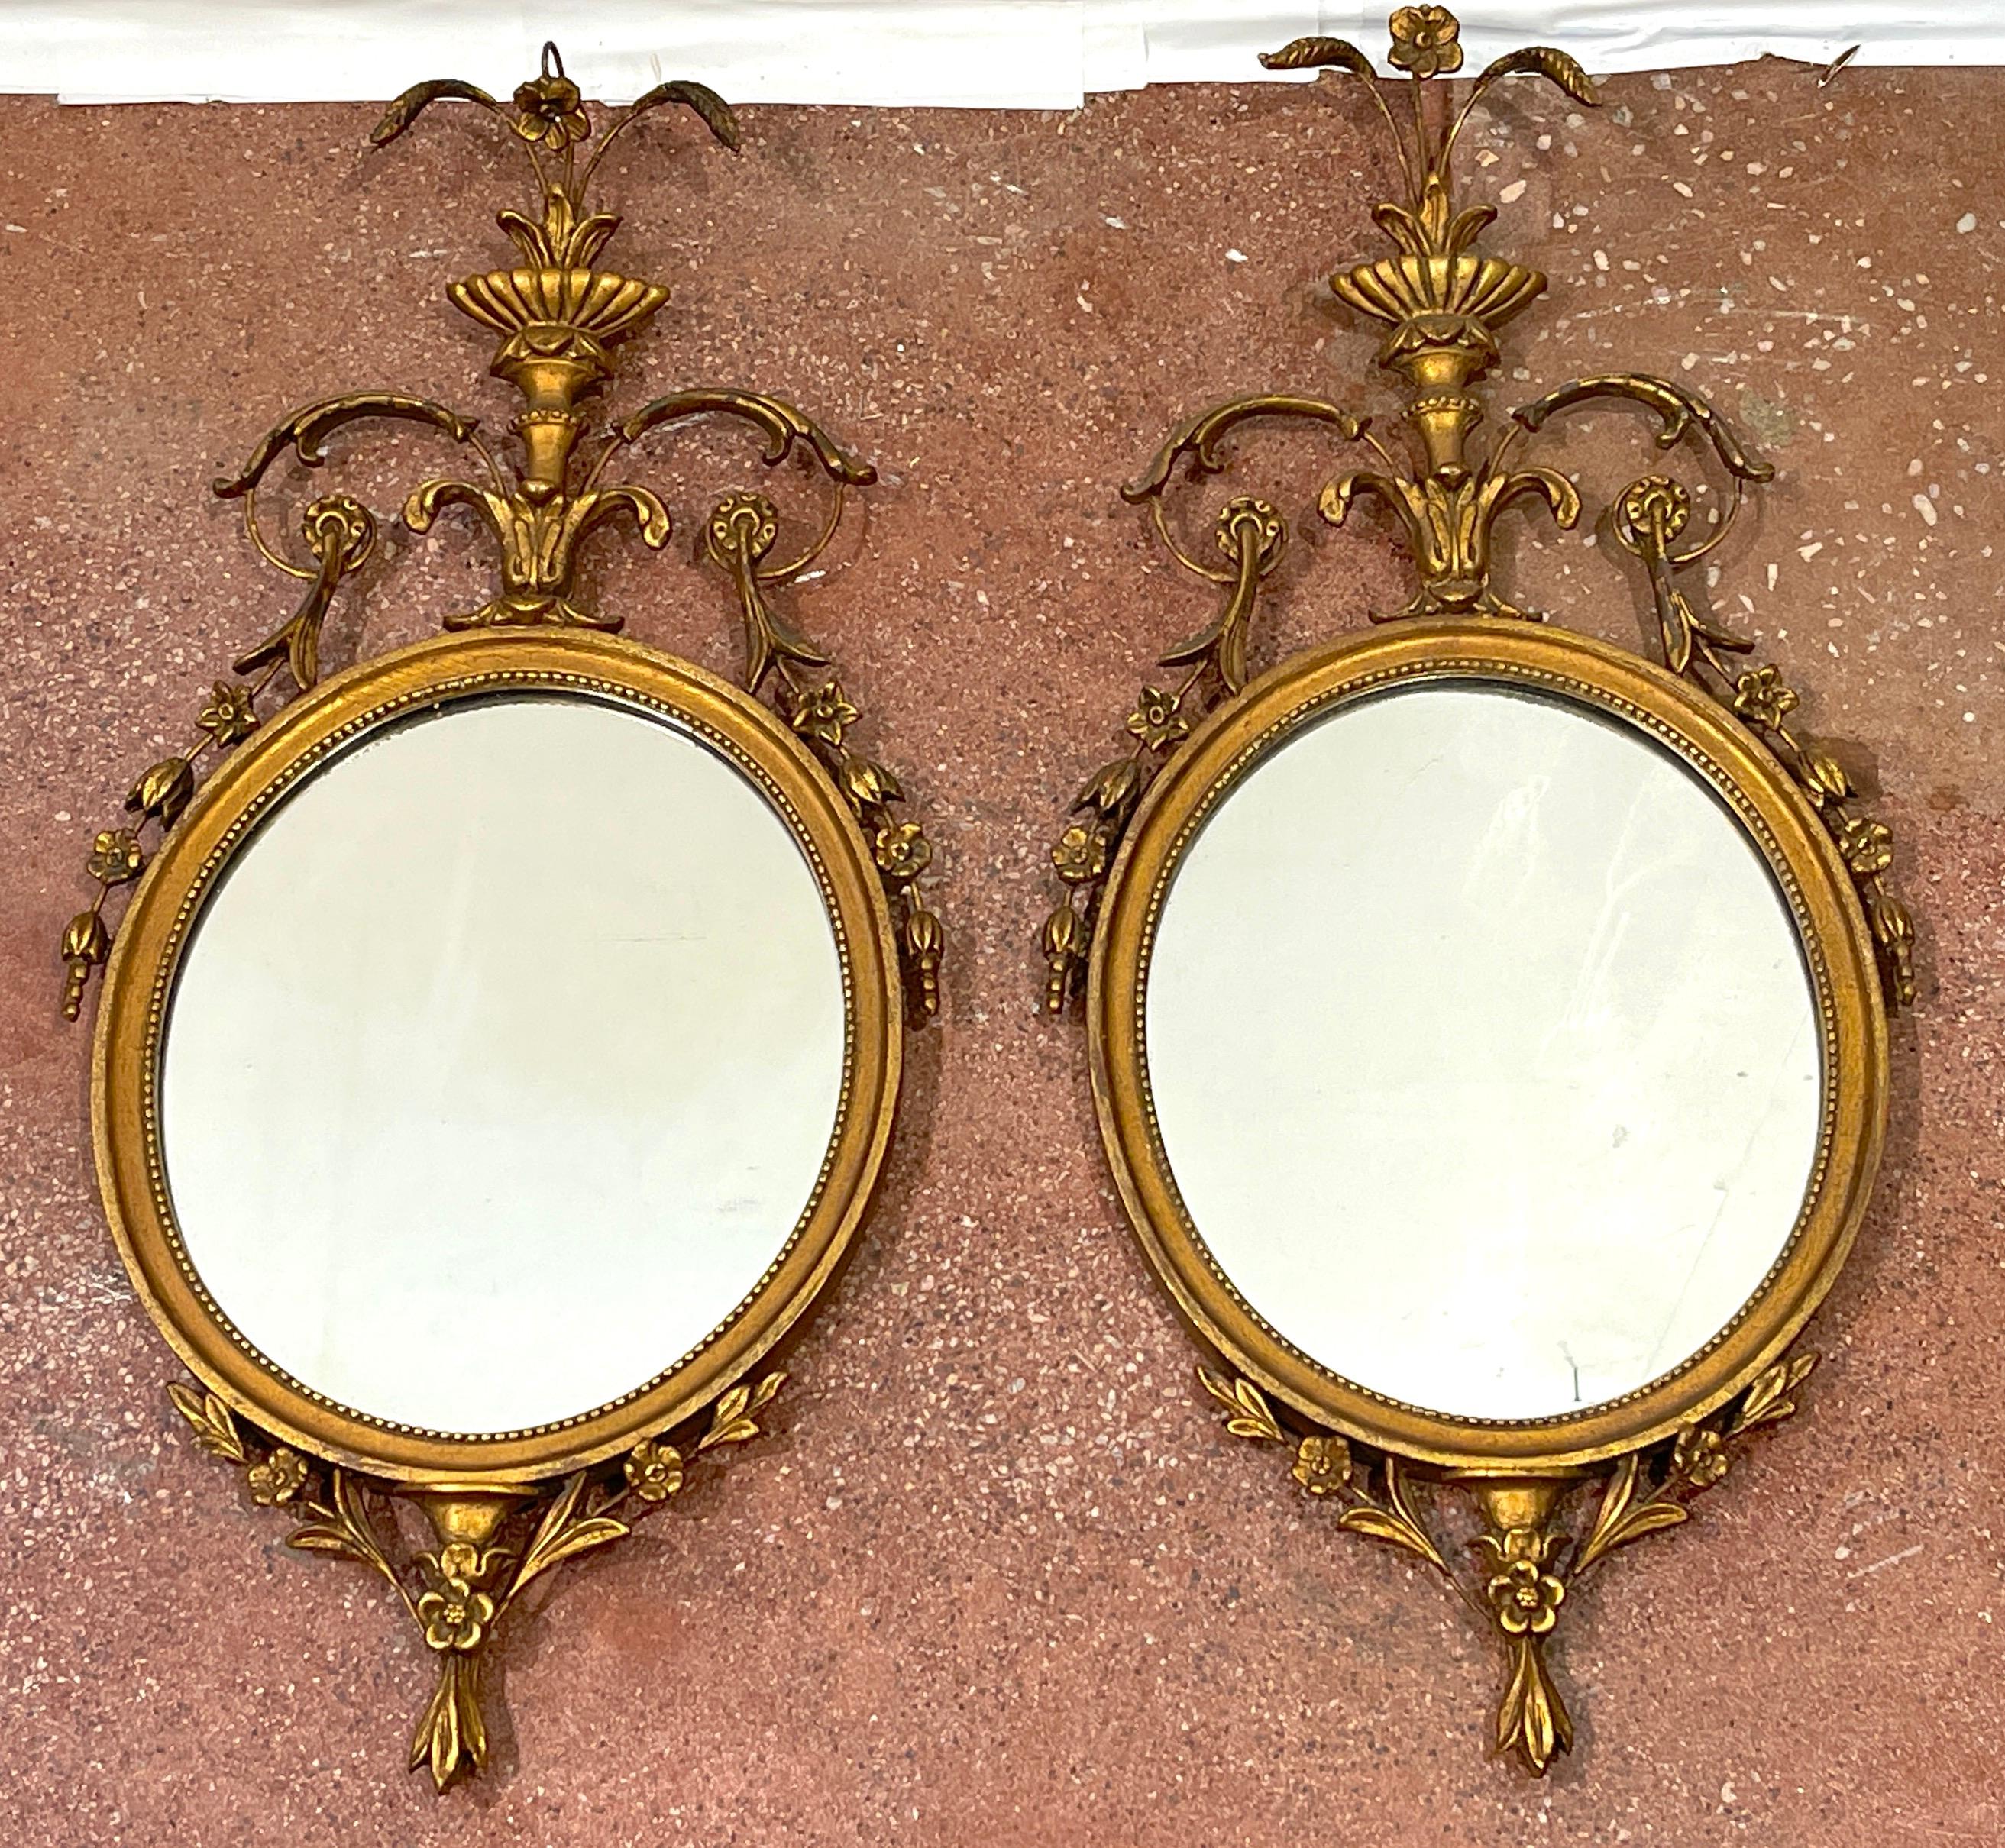 Pair of English Diminutive Georgian style giltwood mirrors, Circa 1900
Each one with floral urn finial and laurels, resting on oval giltwood frame holding a 11.5